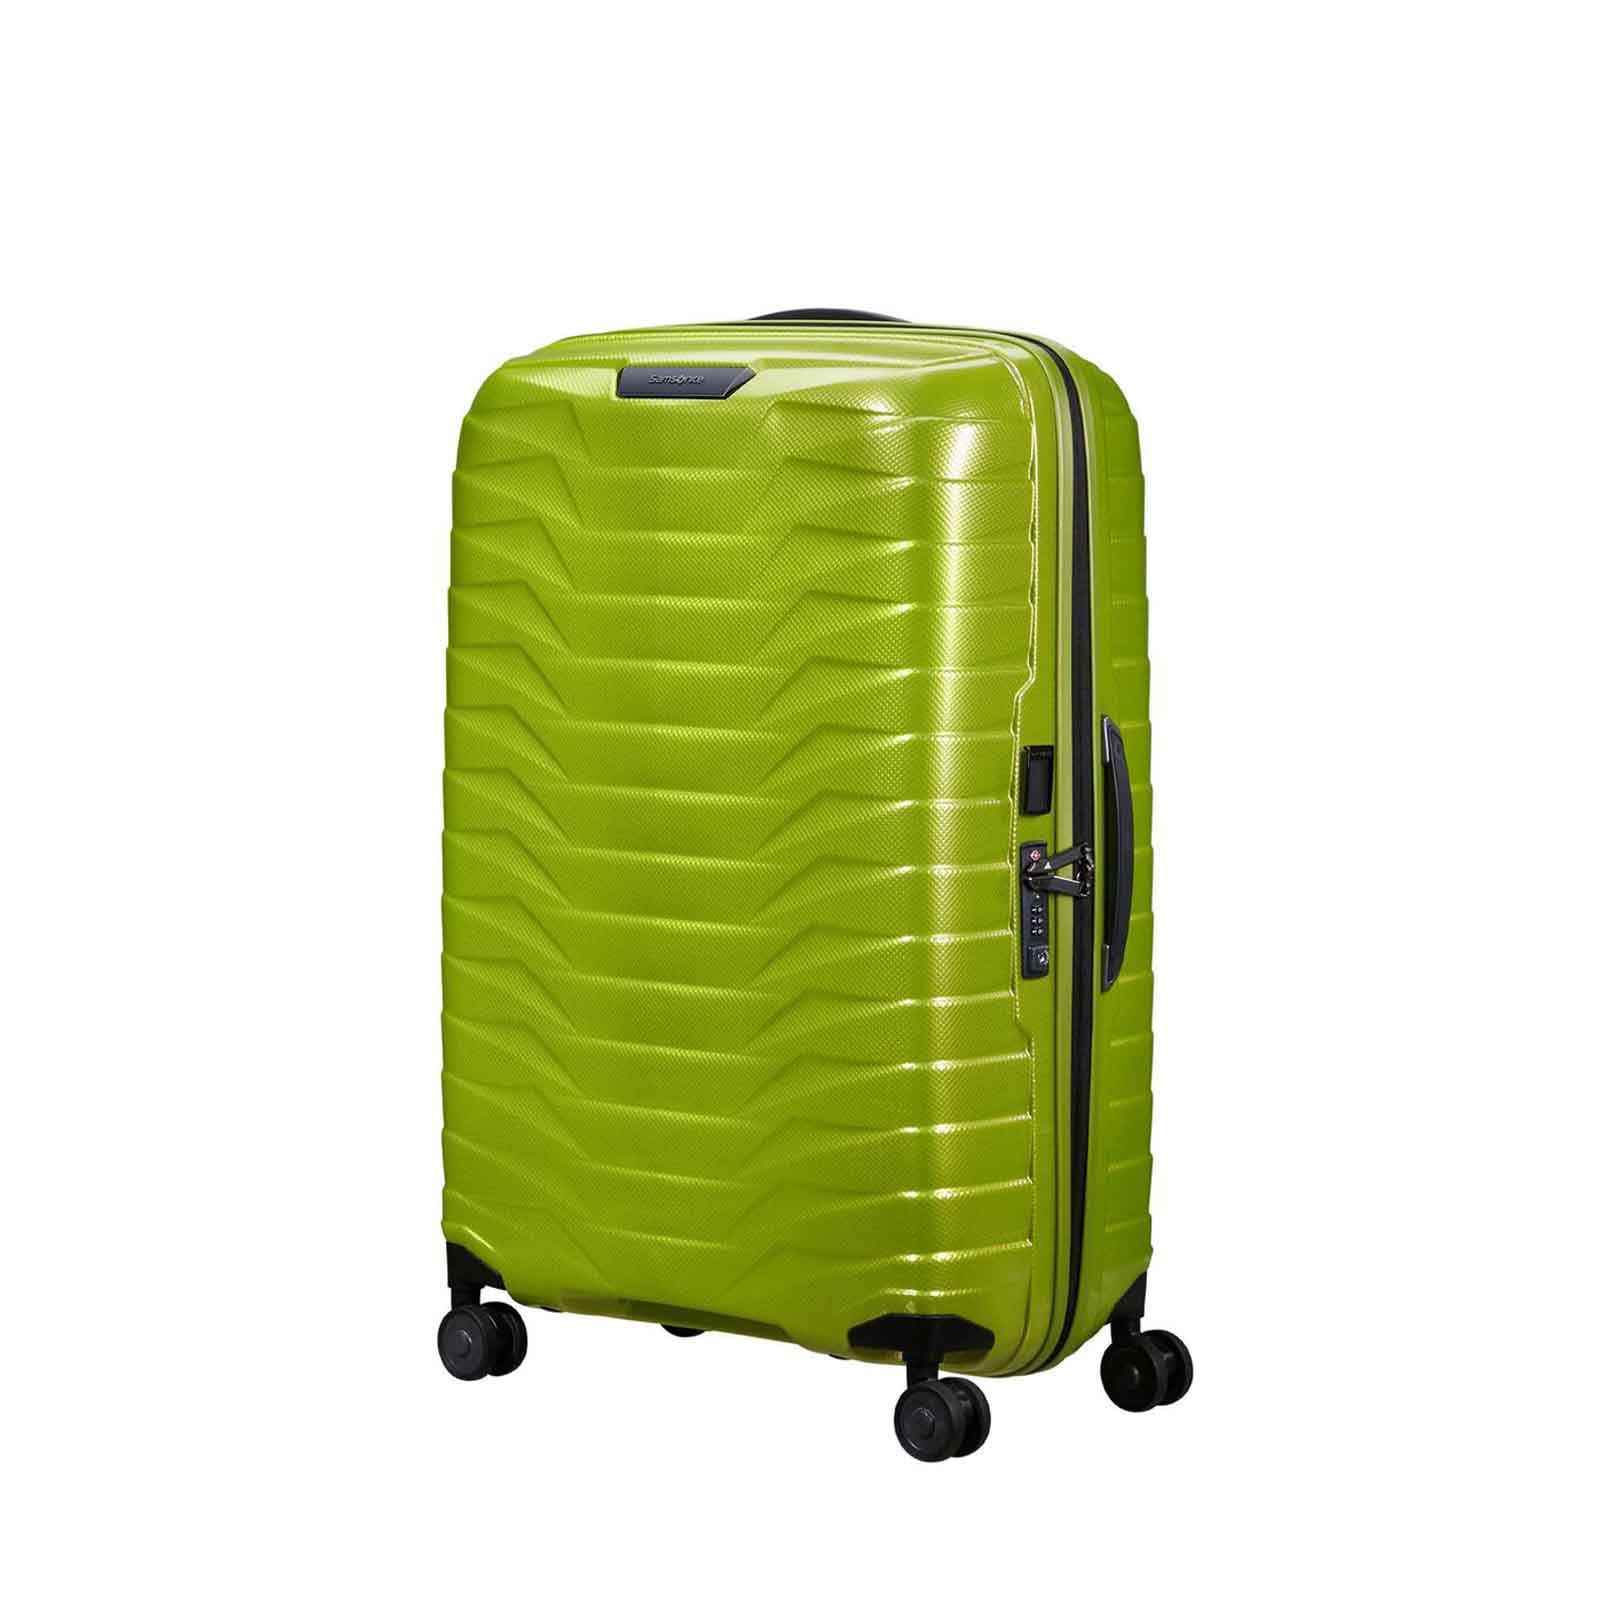 Samsonite-Proxis-75cm-Suitcase-Lime-Front-Angle